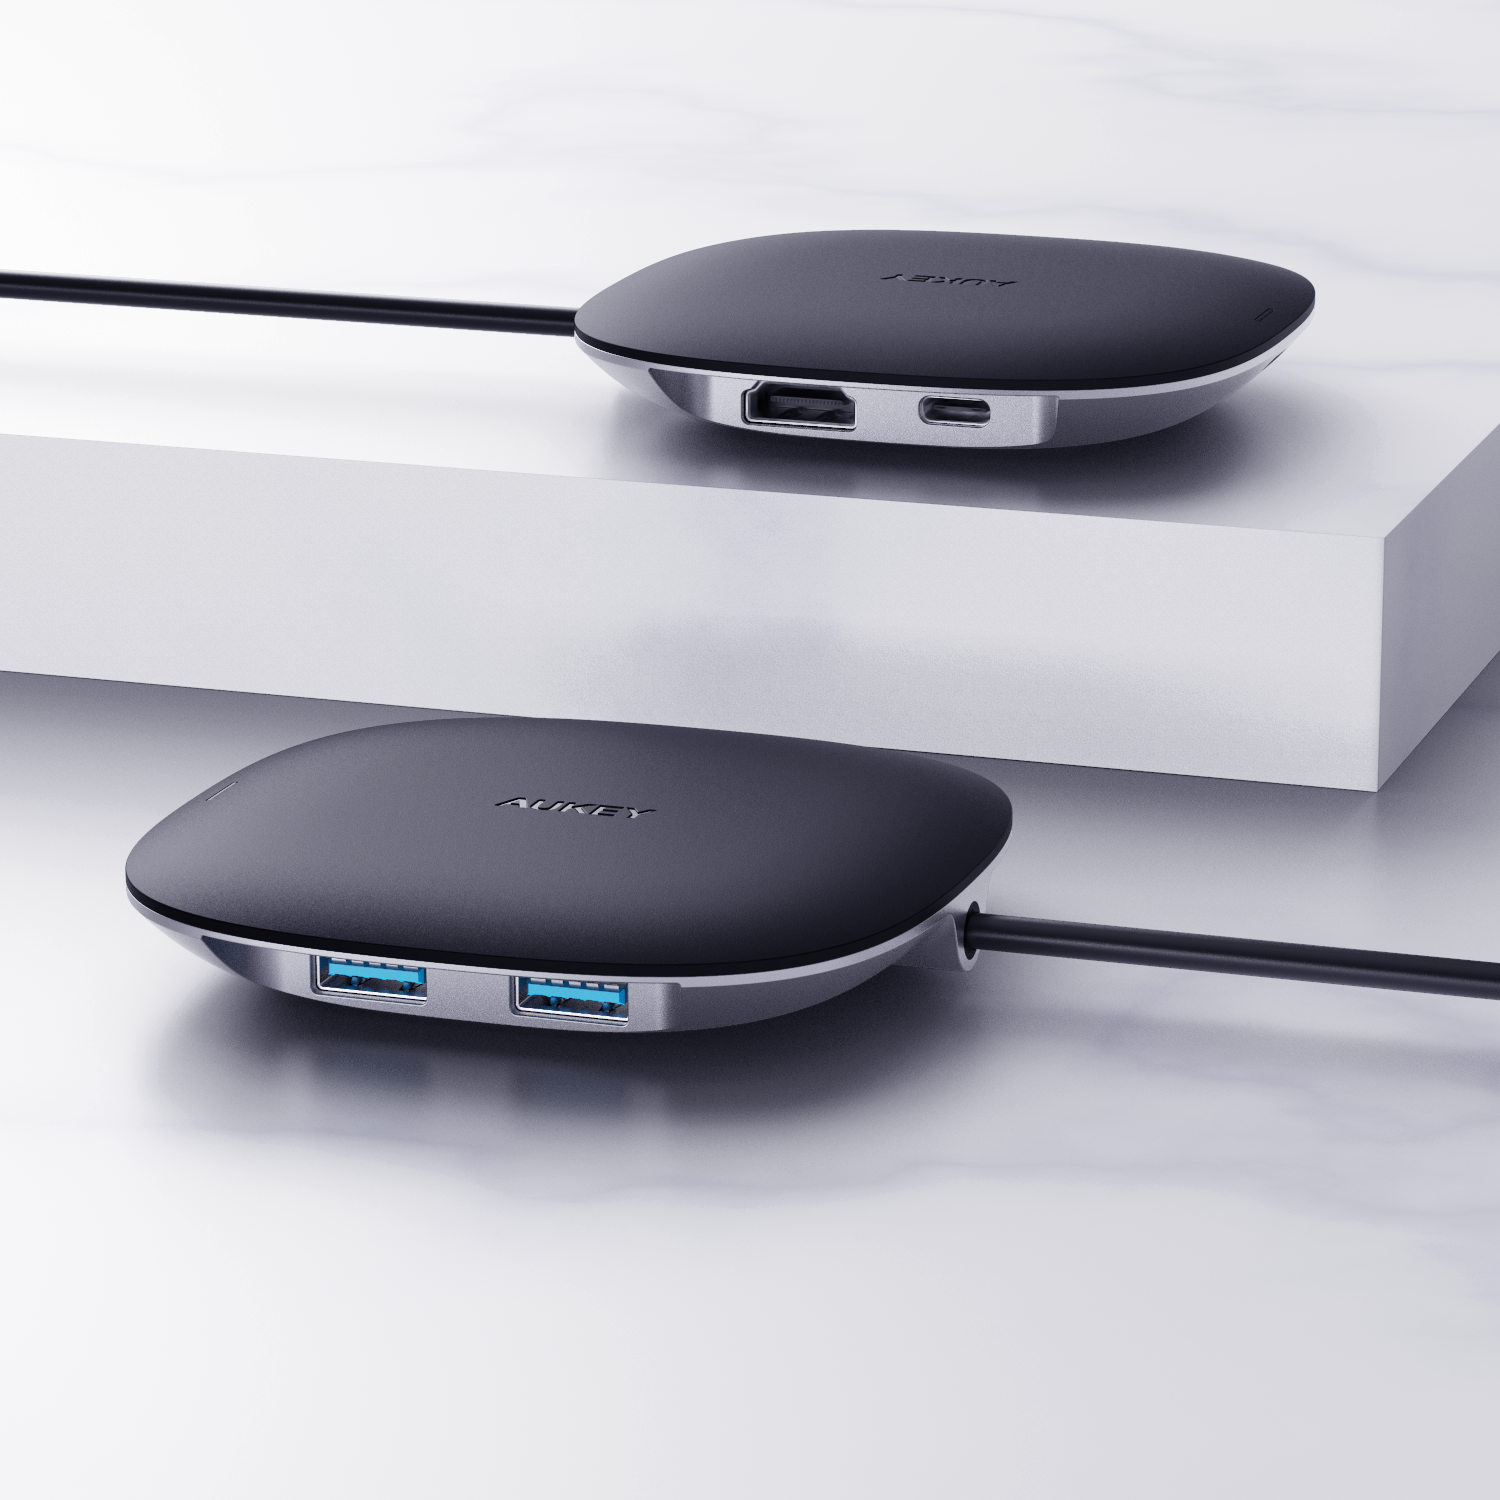 CB-C70 5-in-1 Wireless Charging USB C Hub with 2 USB 3.0 Ports, 4K HDMI and 100W Power Delivery